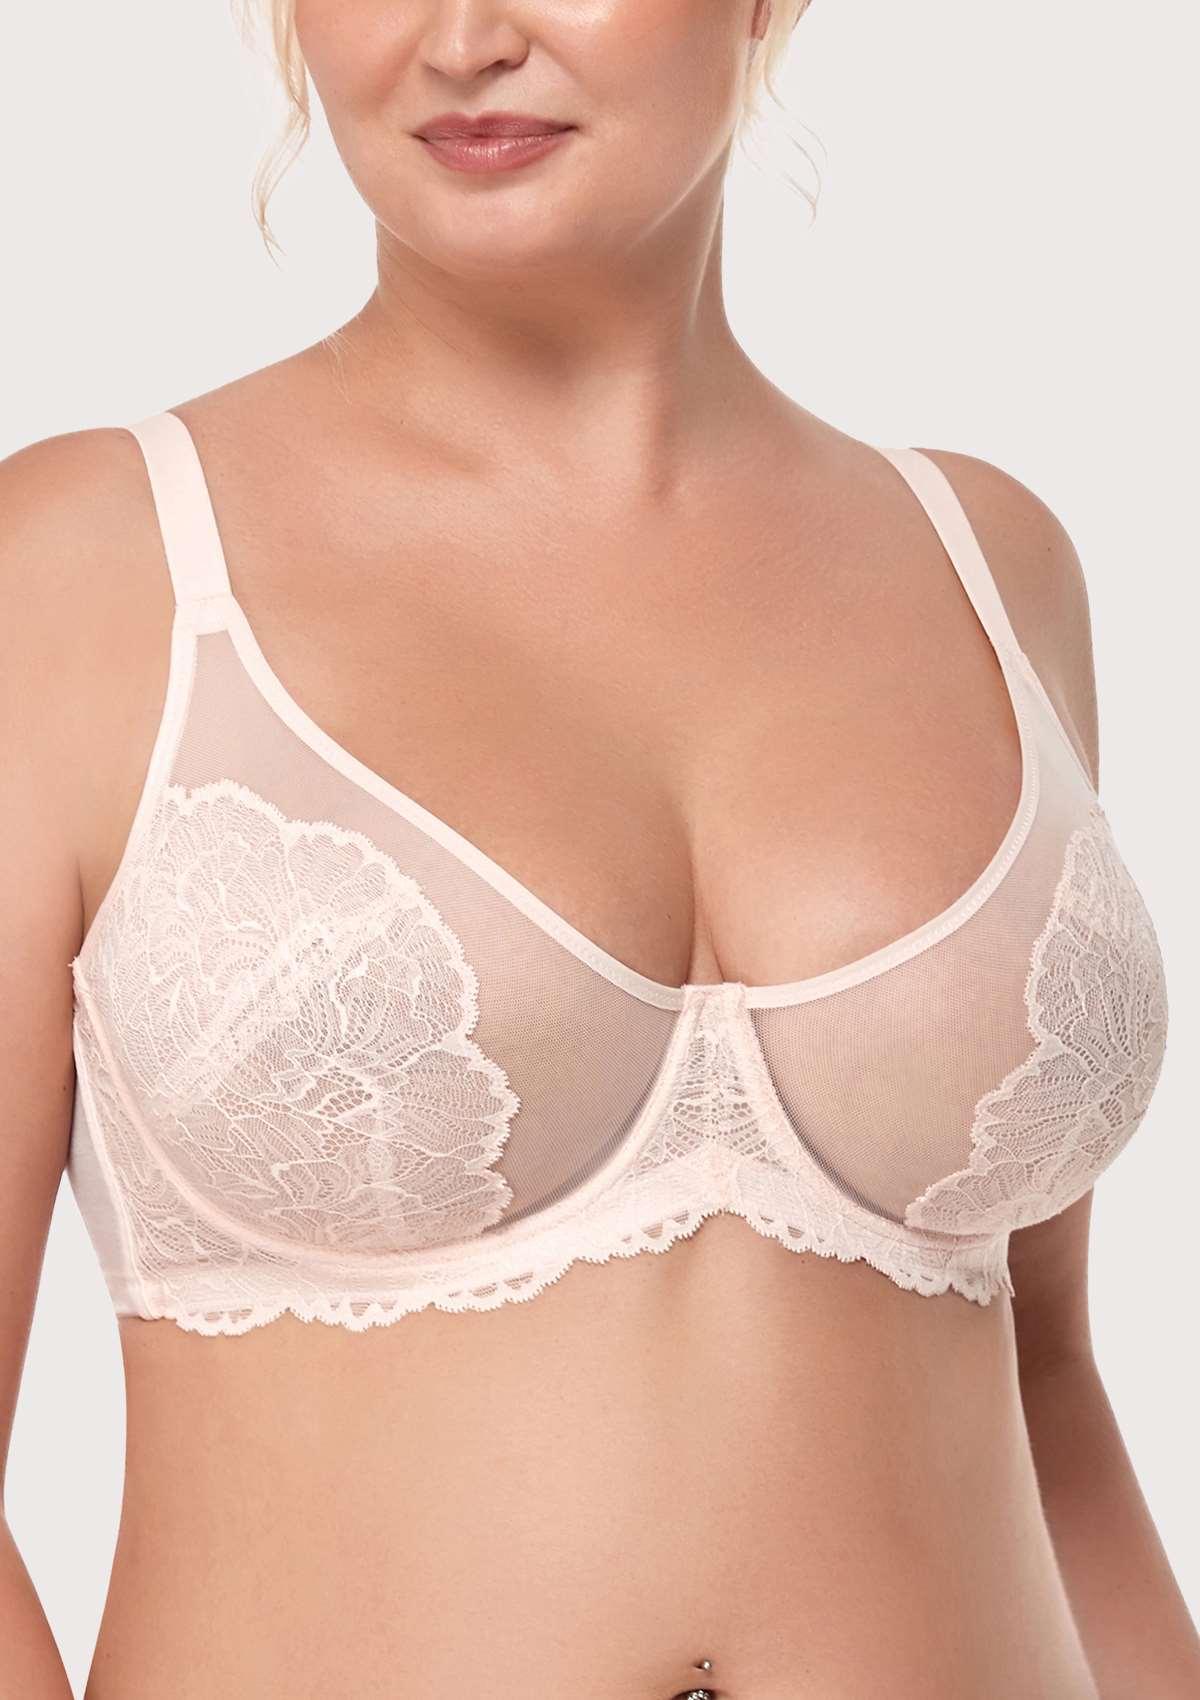 HSIA Blossom Matching Lacey Underwear And Bra Set: Sexy Lace Bra - Dusty Peach / 34 / H